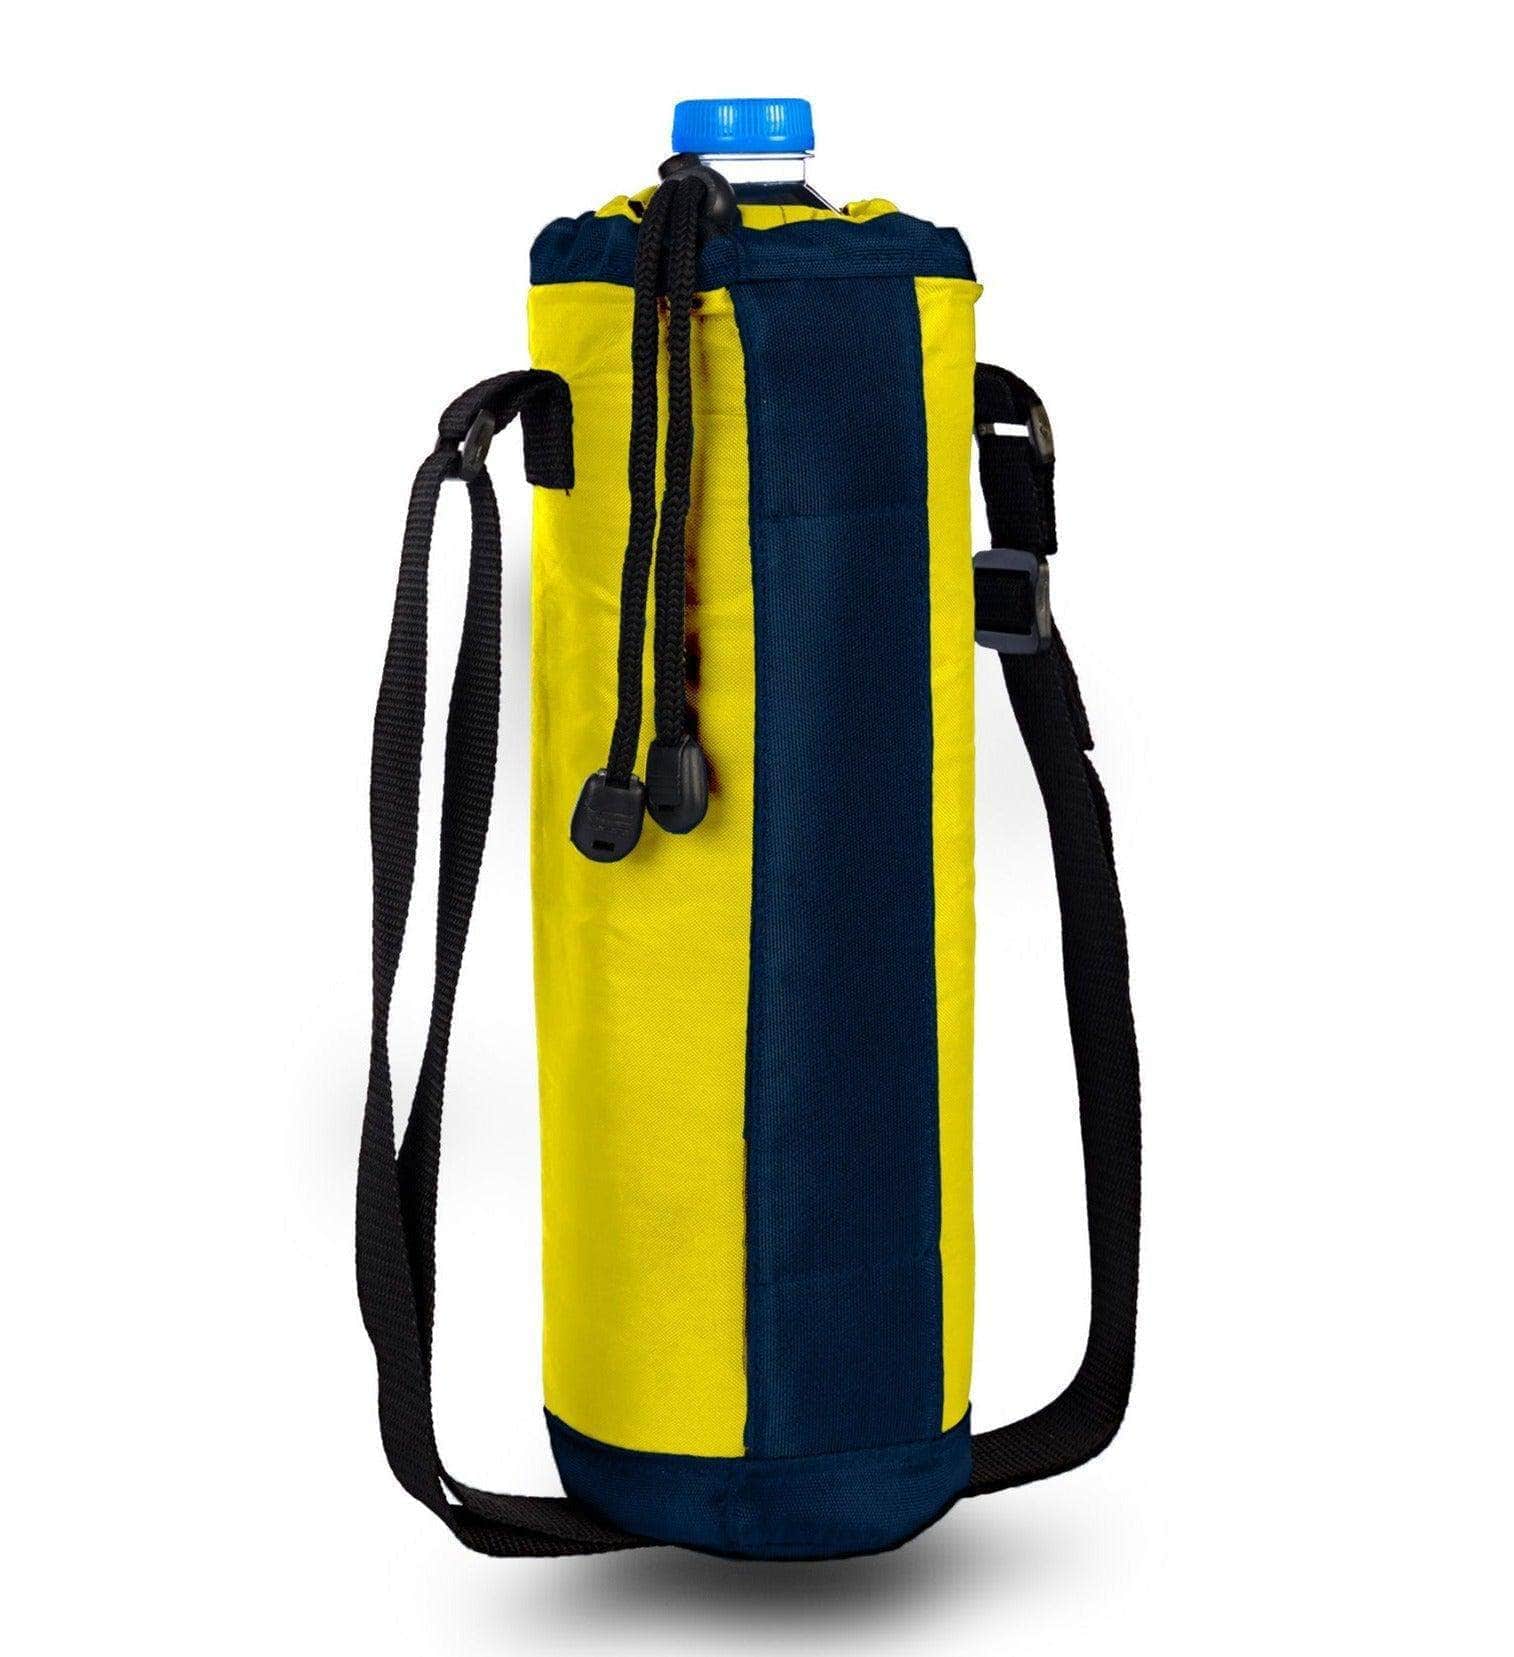 Insulated 1.5 Liter Bottle Cover / Bag / Water Bottle Pouch